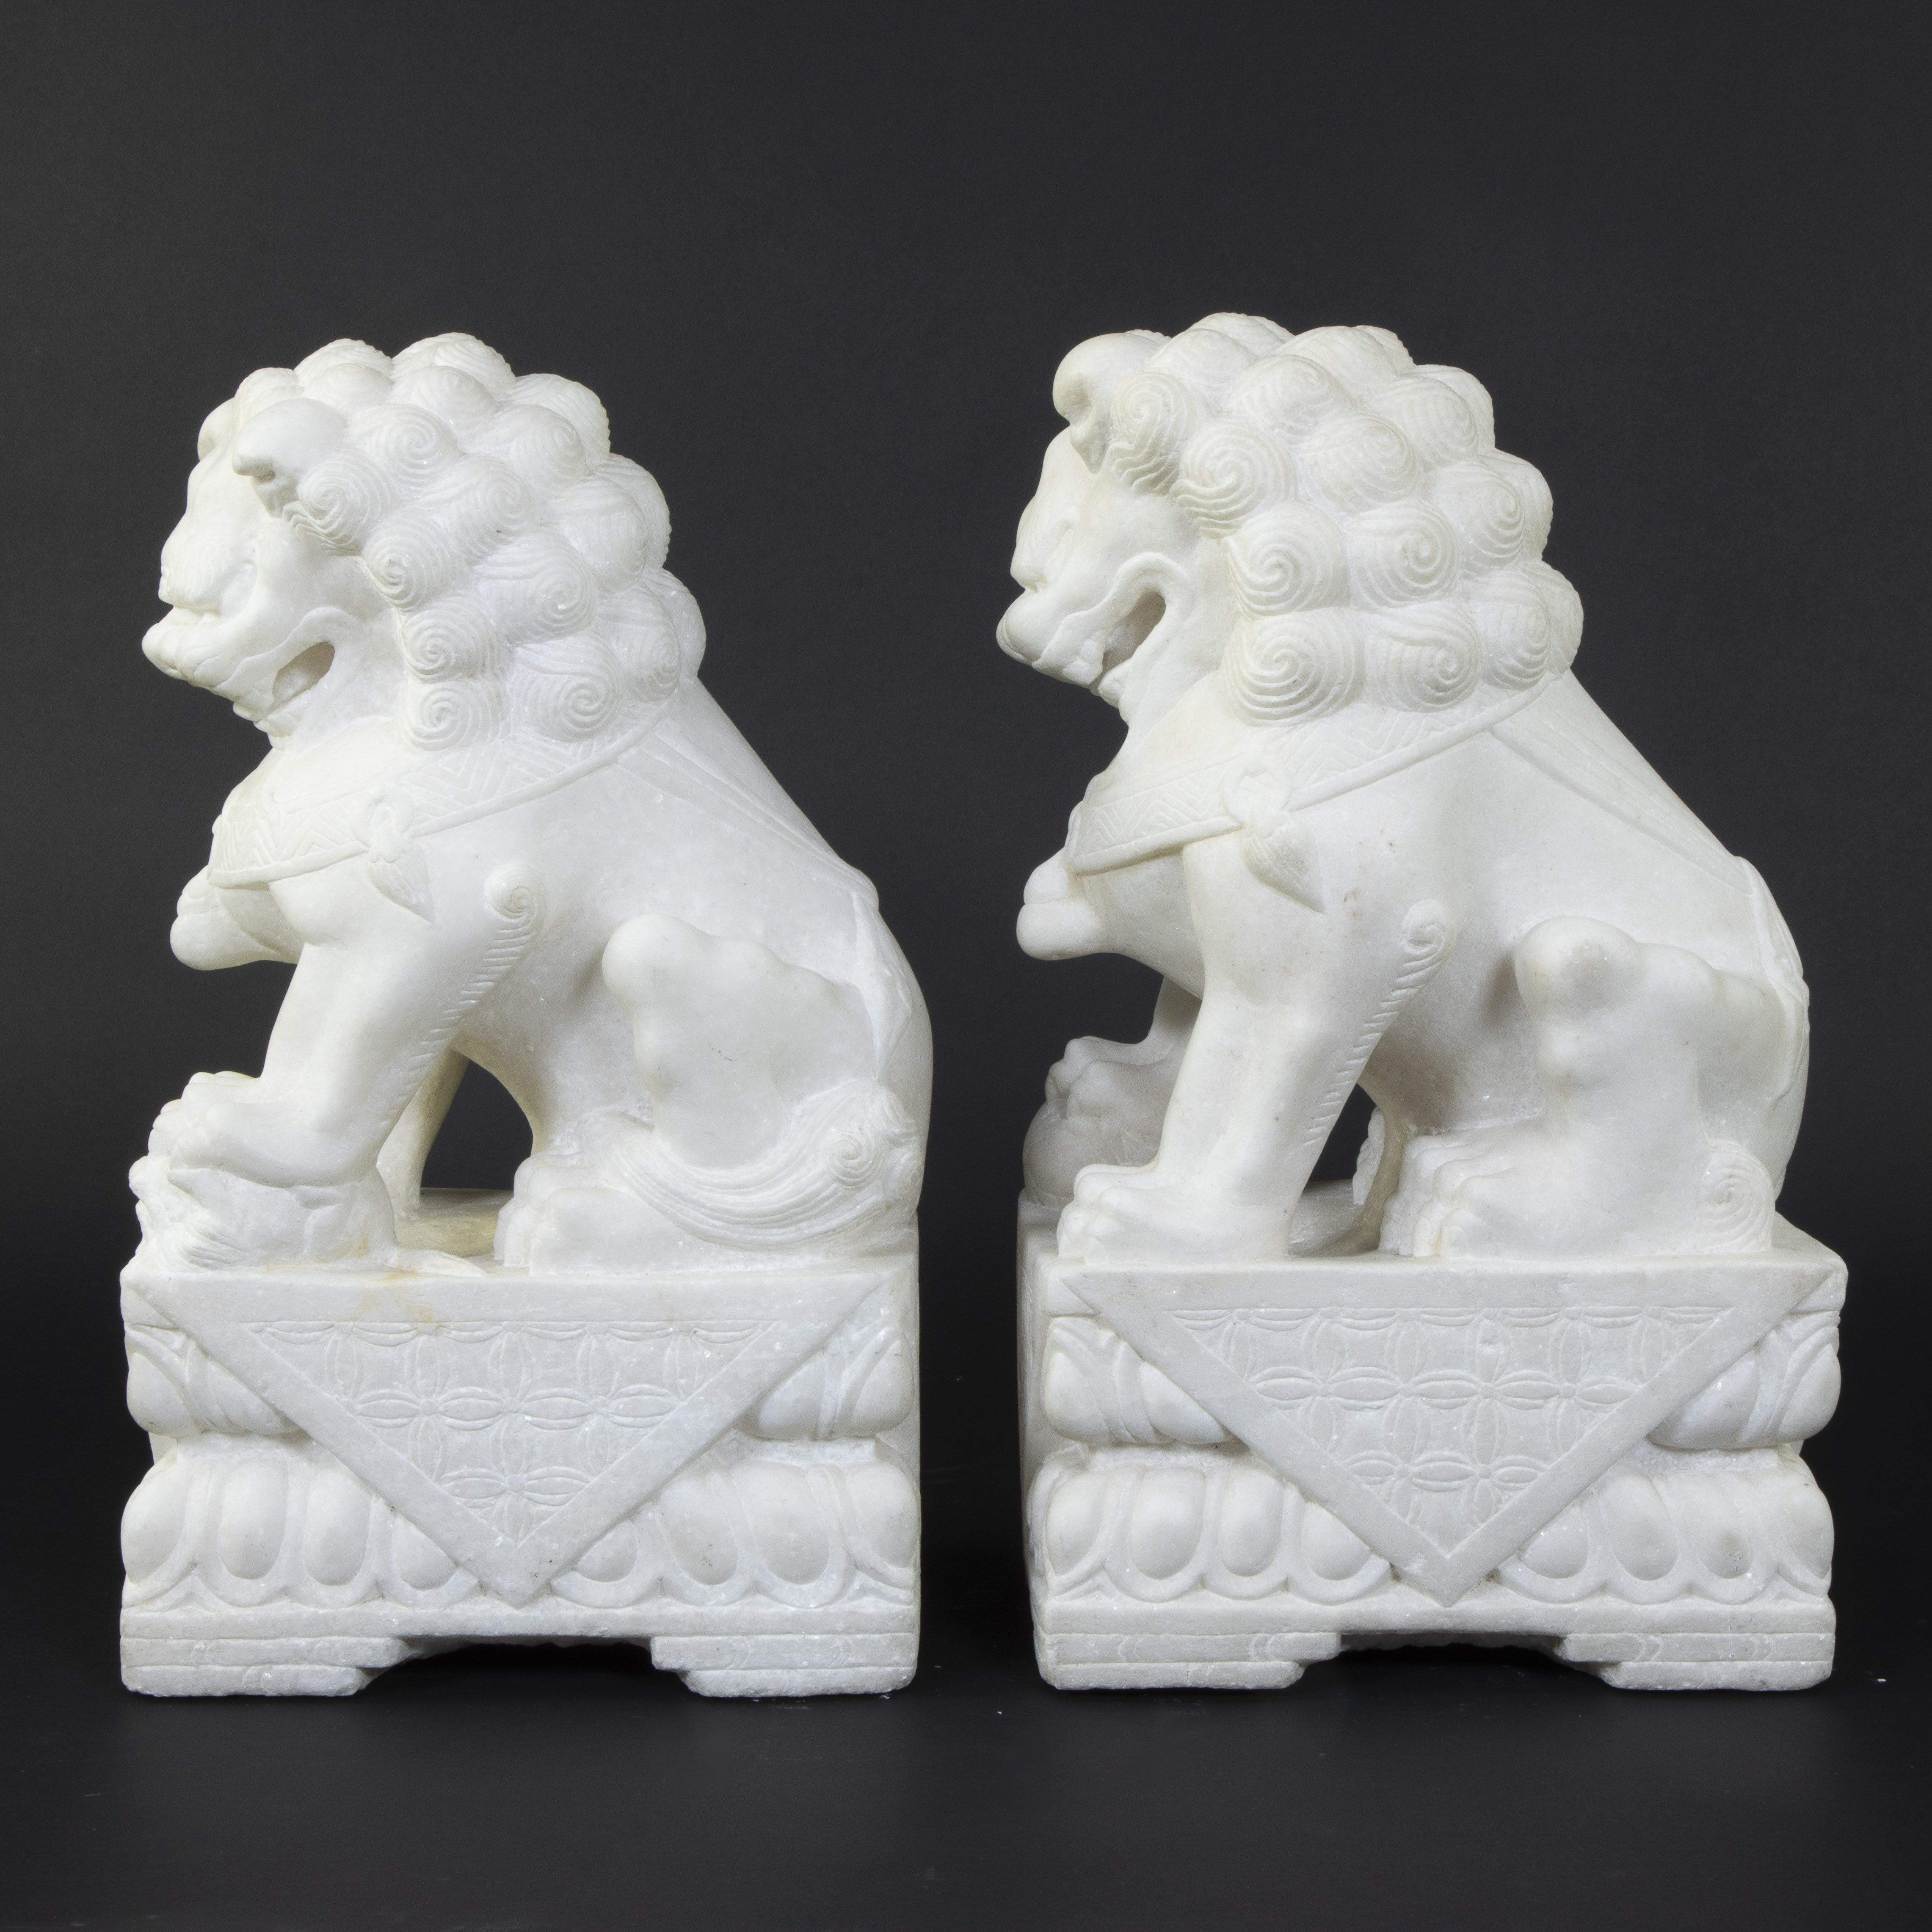 Pair of marble Chinese temple guards or Foo lions, 20th century - Image 2 of 4